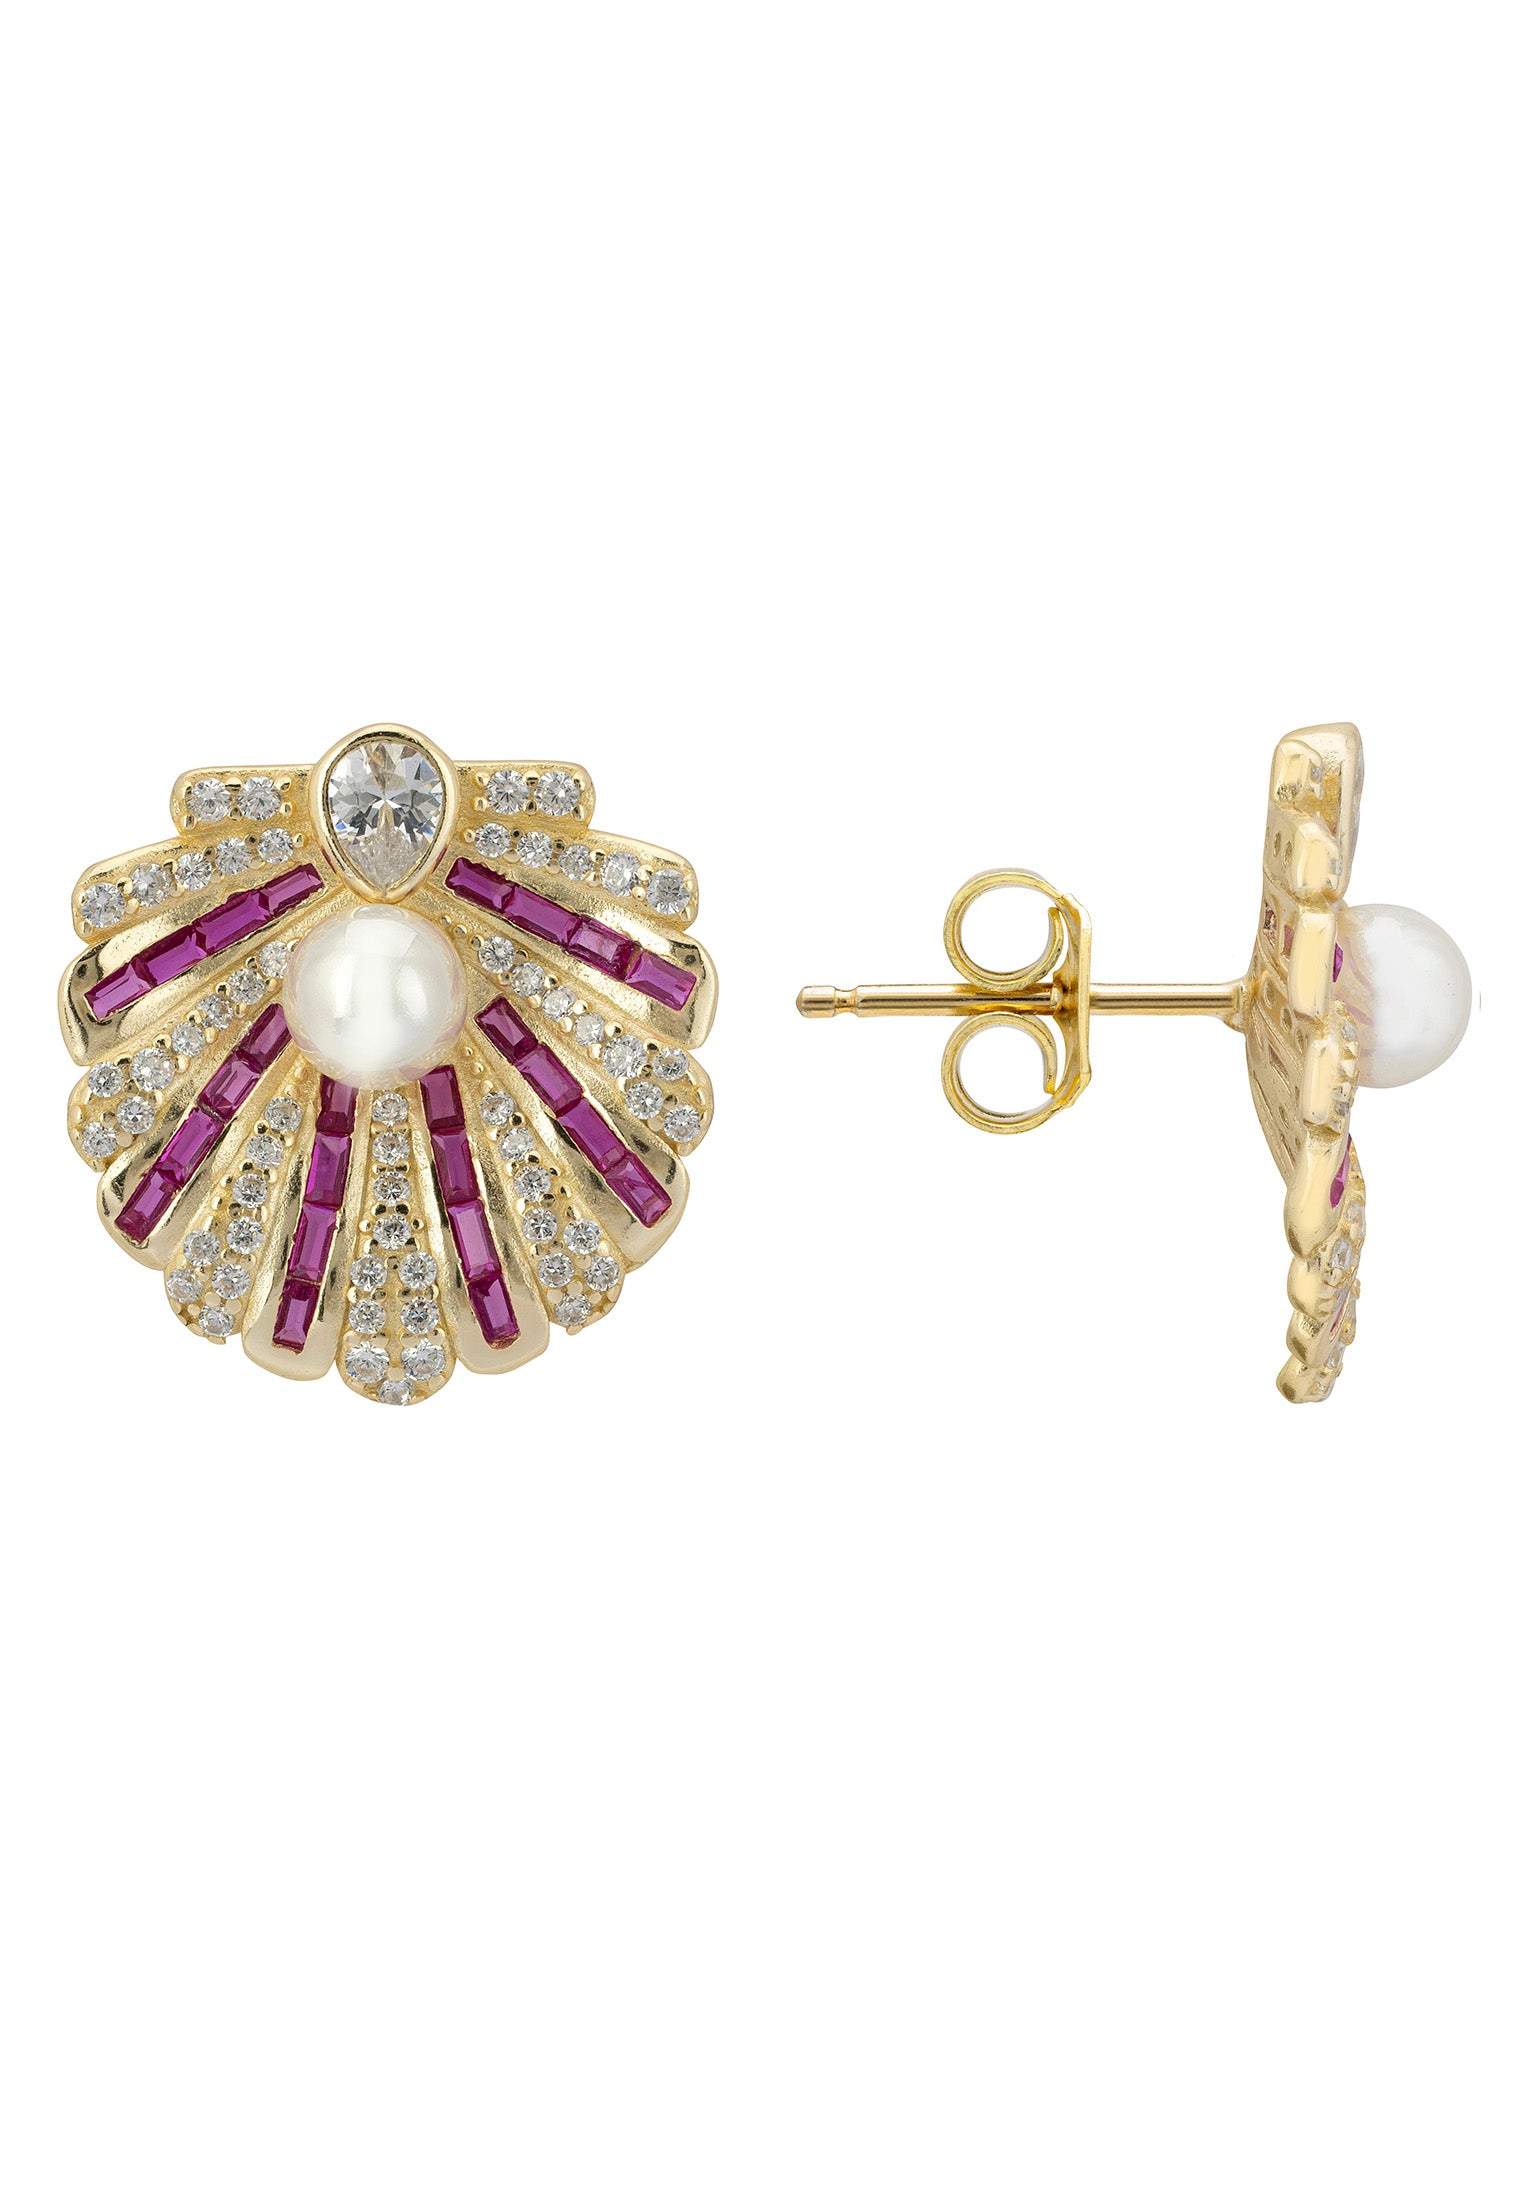 Art Deco Scallop Shell Earrings Ruby Red With Pearl Gold